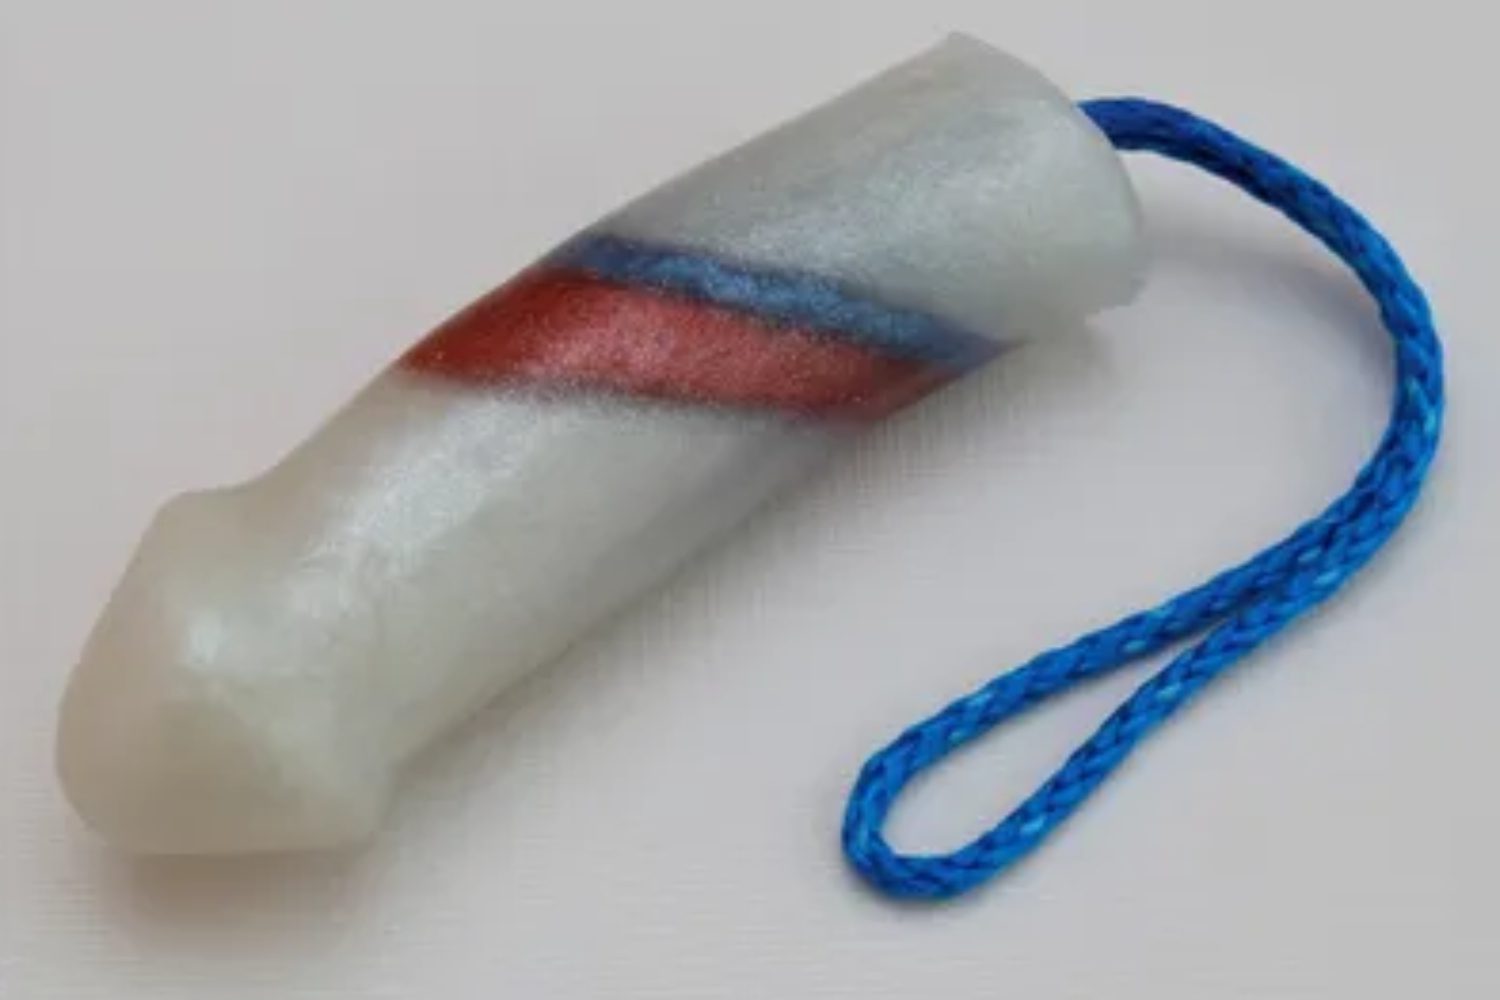 A plastic tube with a blue string attached to it.